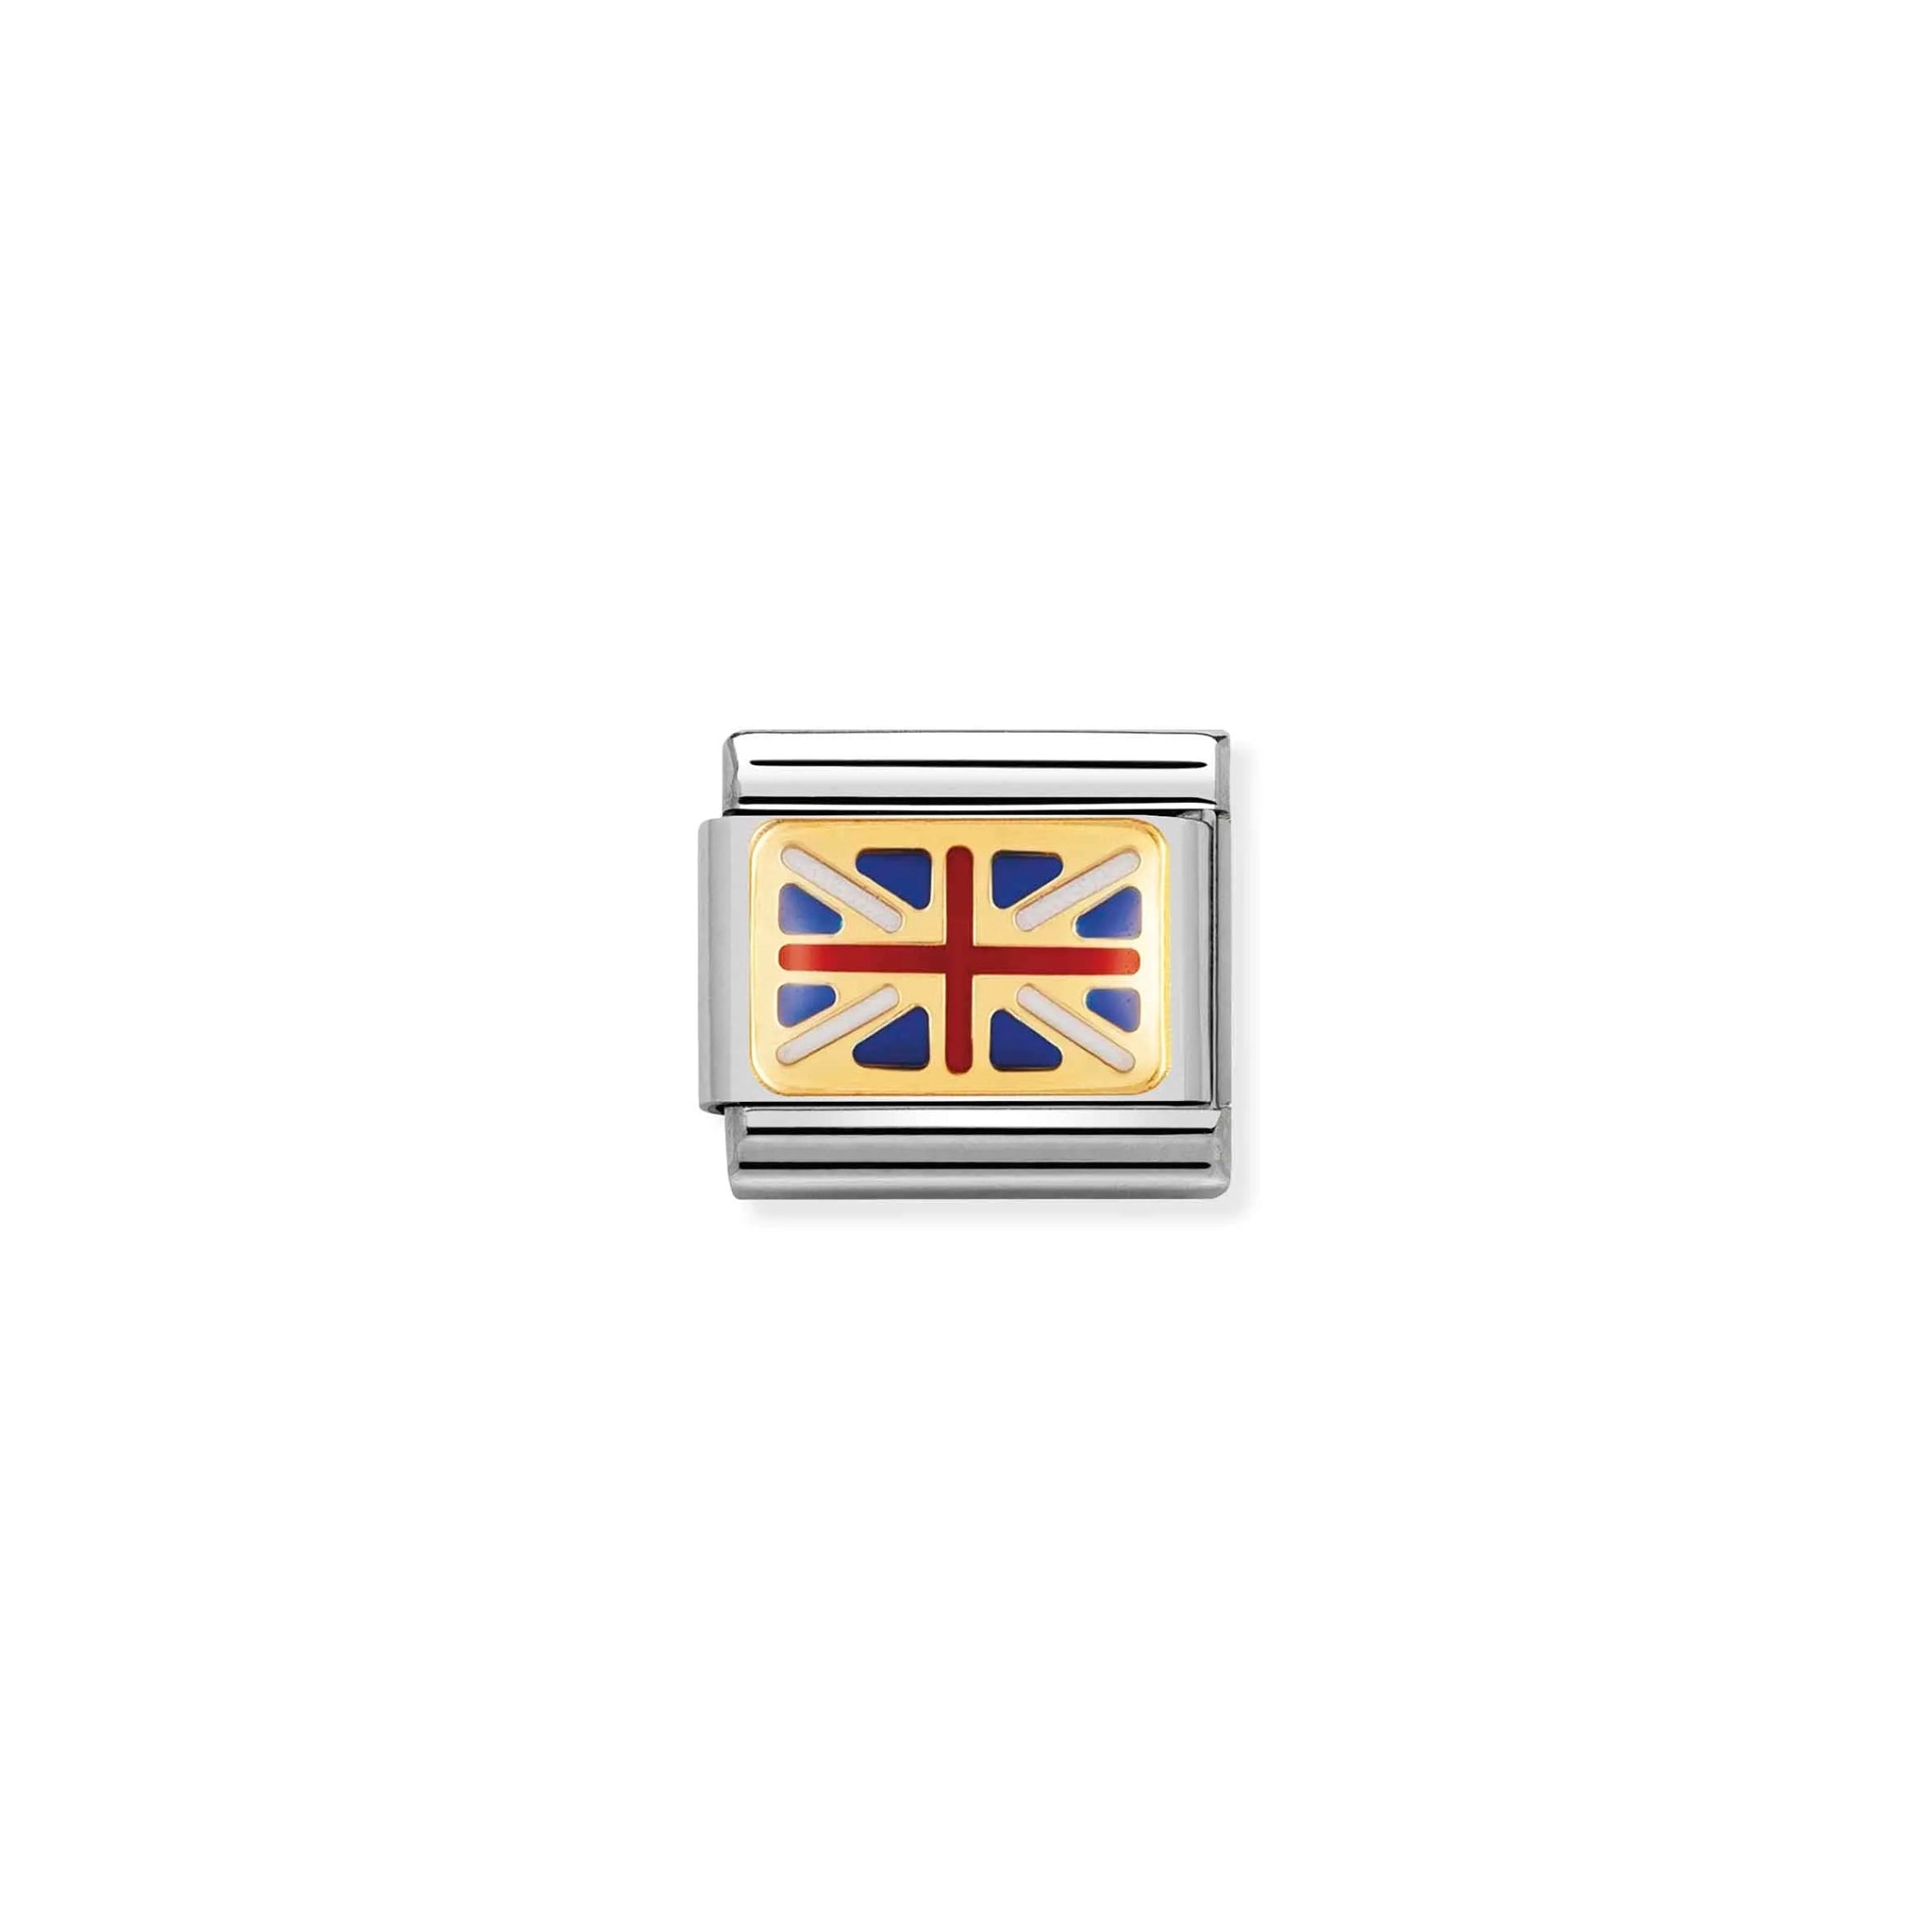 A Nomination charm link featuring the Great Britain flag with enamel